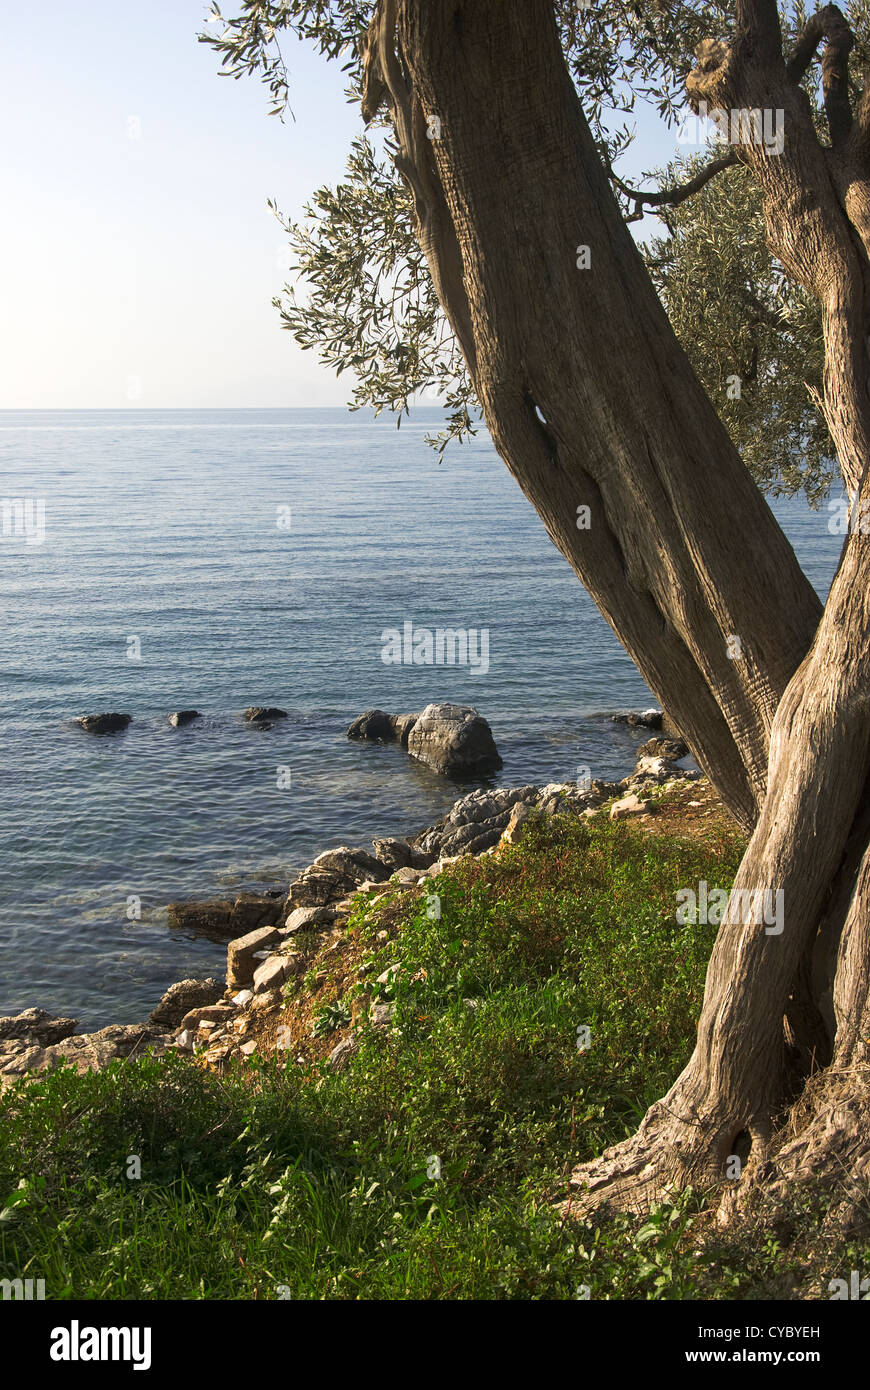 Olive tree by the sea Stock Photo